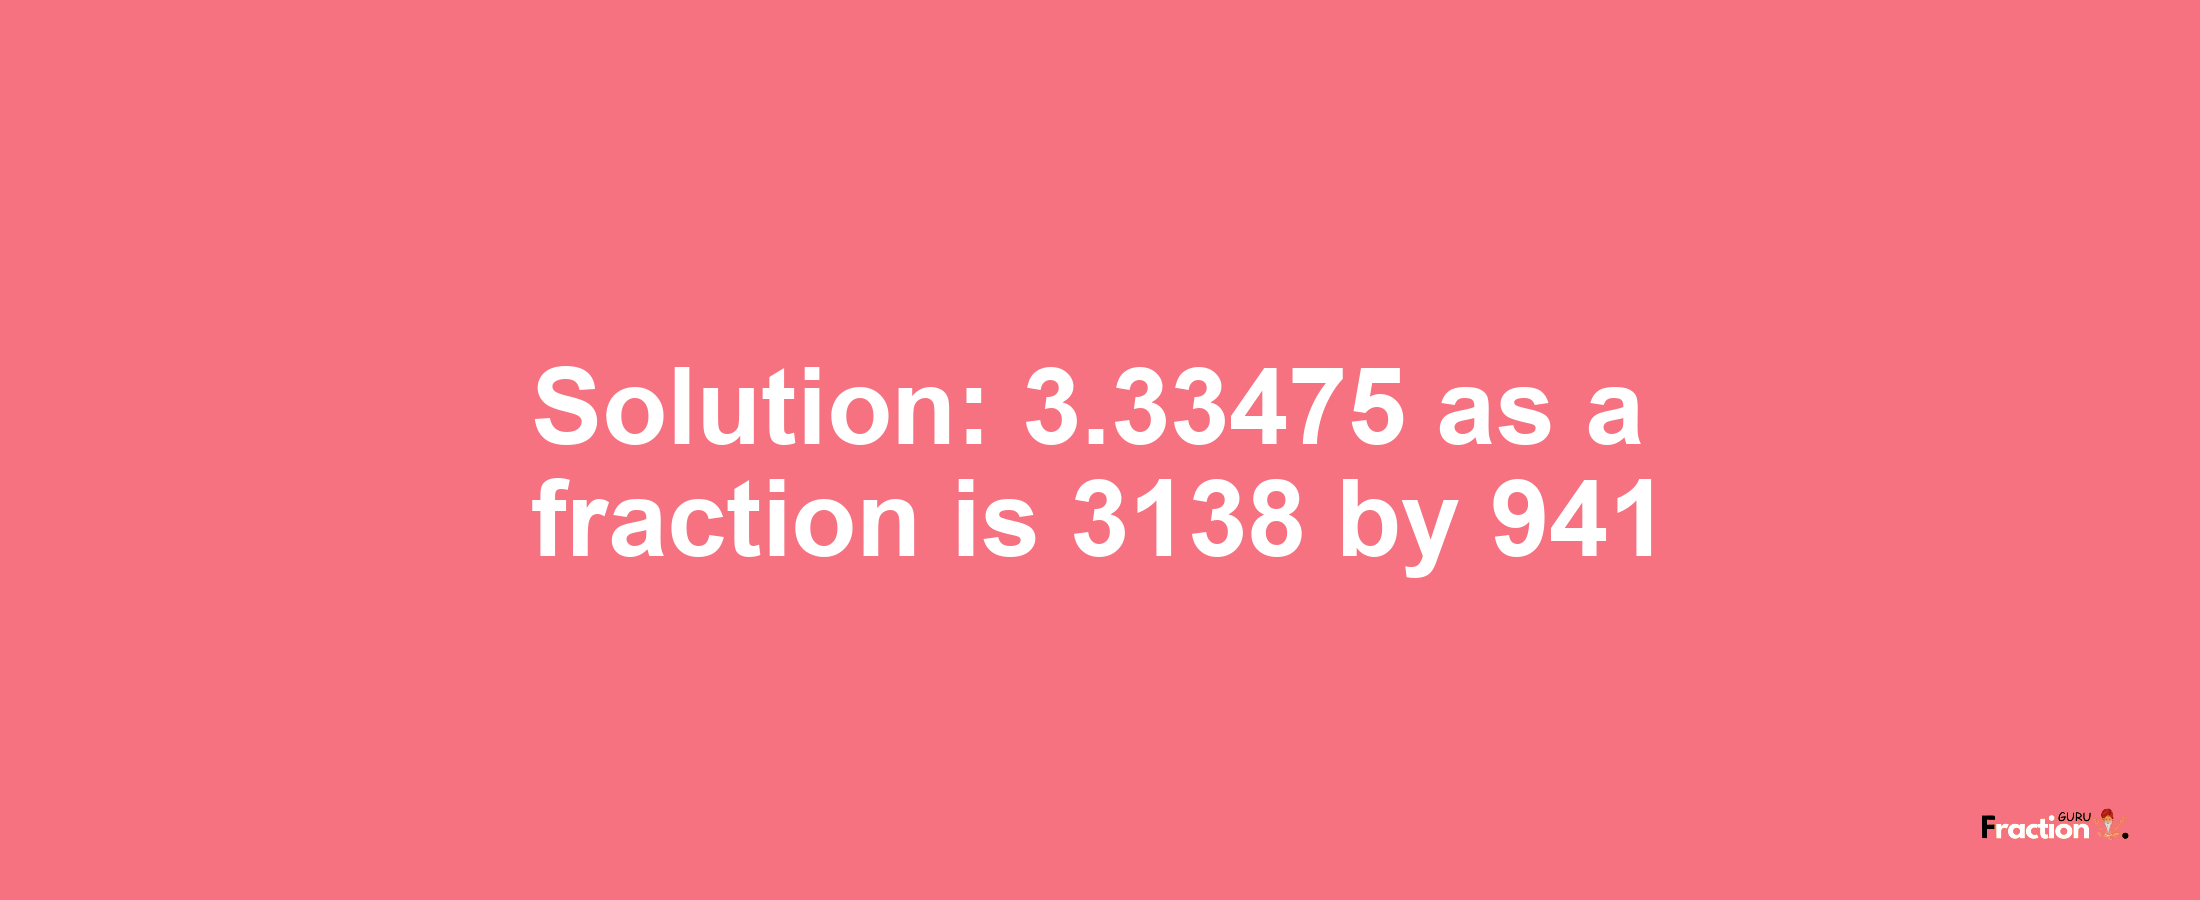 Solution:3.33475 as a fraction is 3138/941